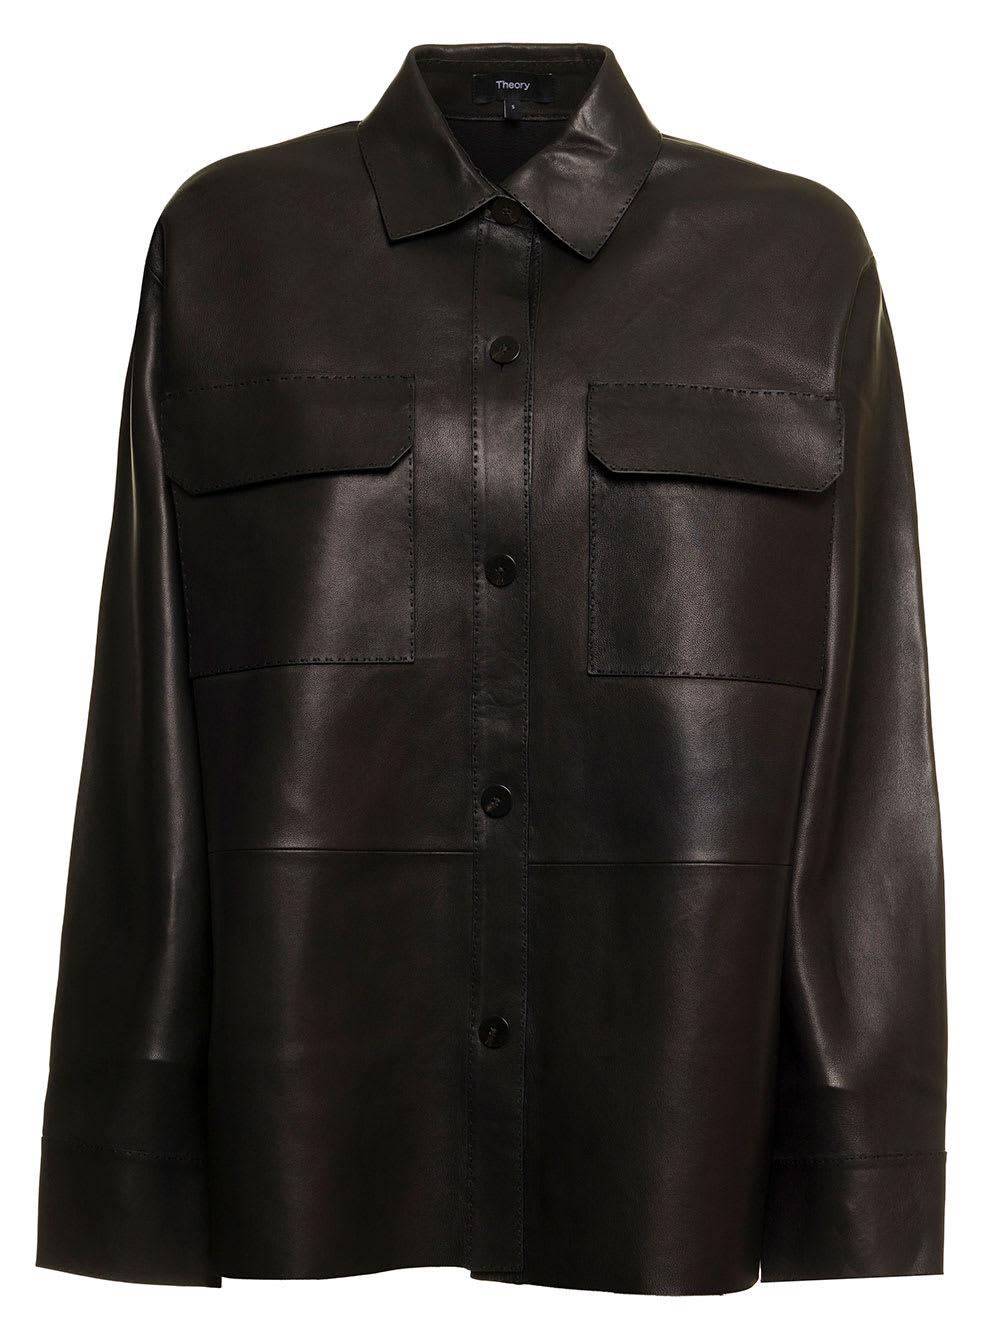 Theory Woman Black Leather Shirt With Pockets